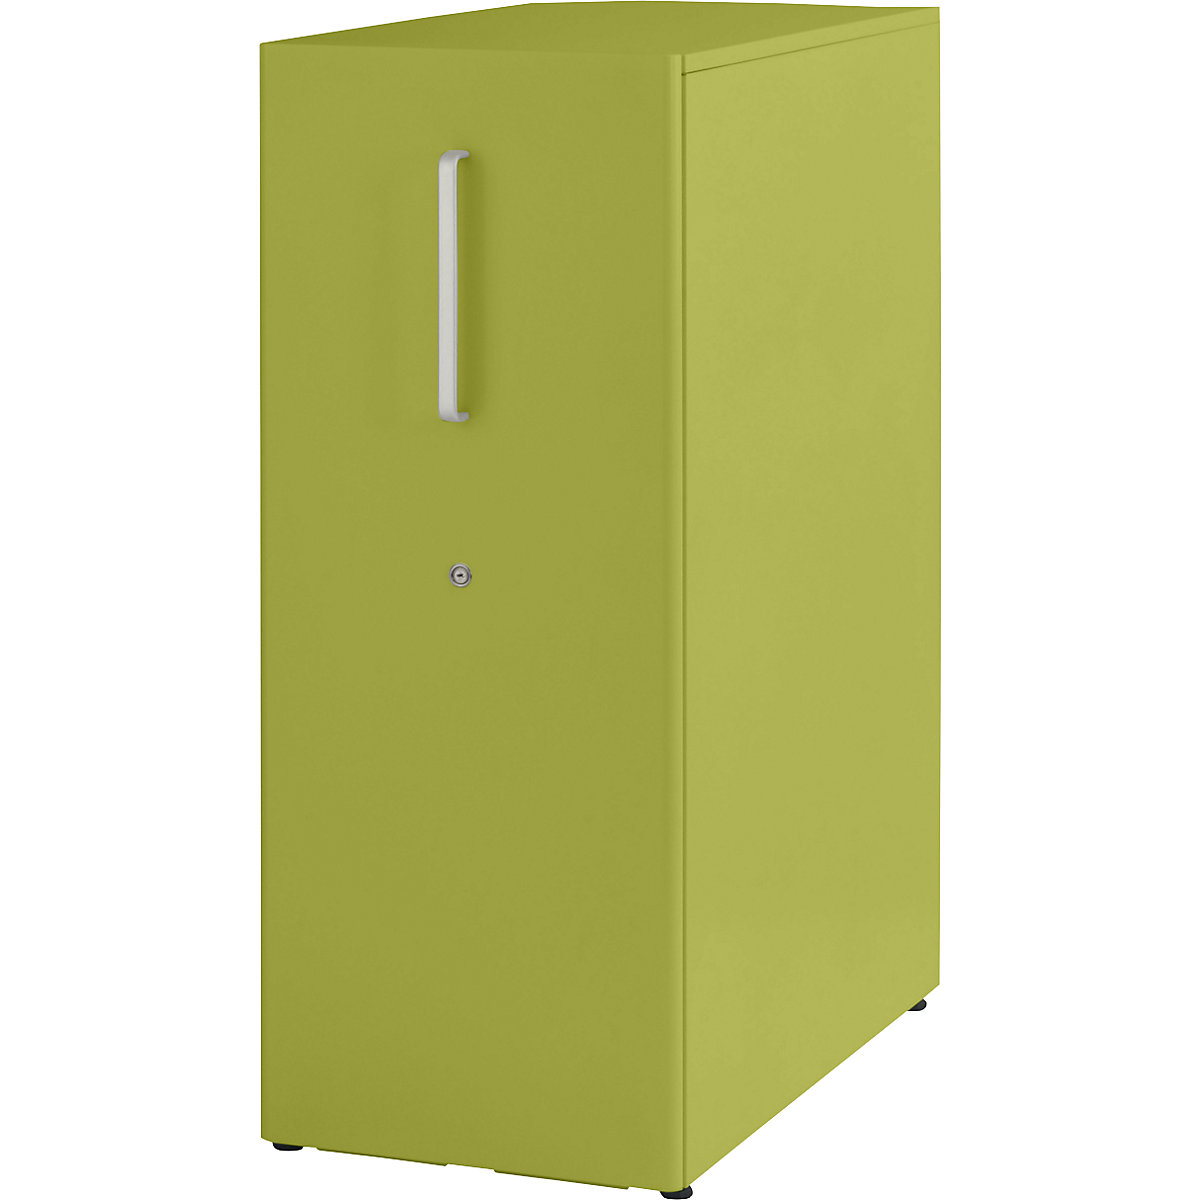 Tower™ 3 add-on furniture, with worktop – BISLEY, for the right side, 3 shelves, green-10